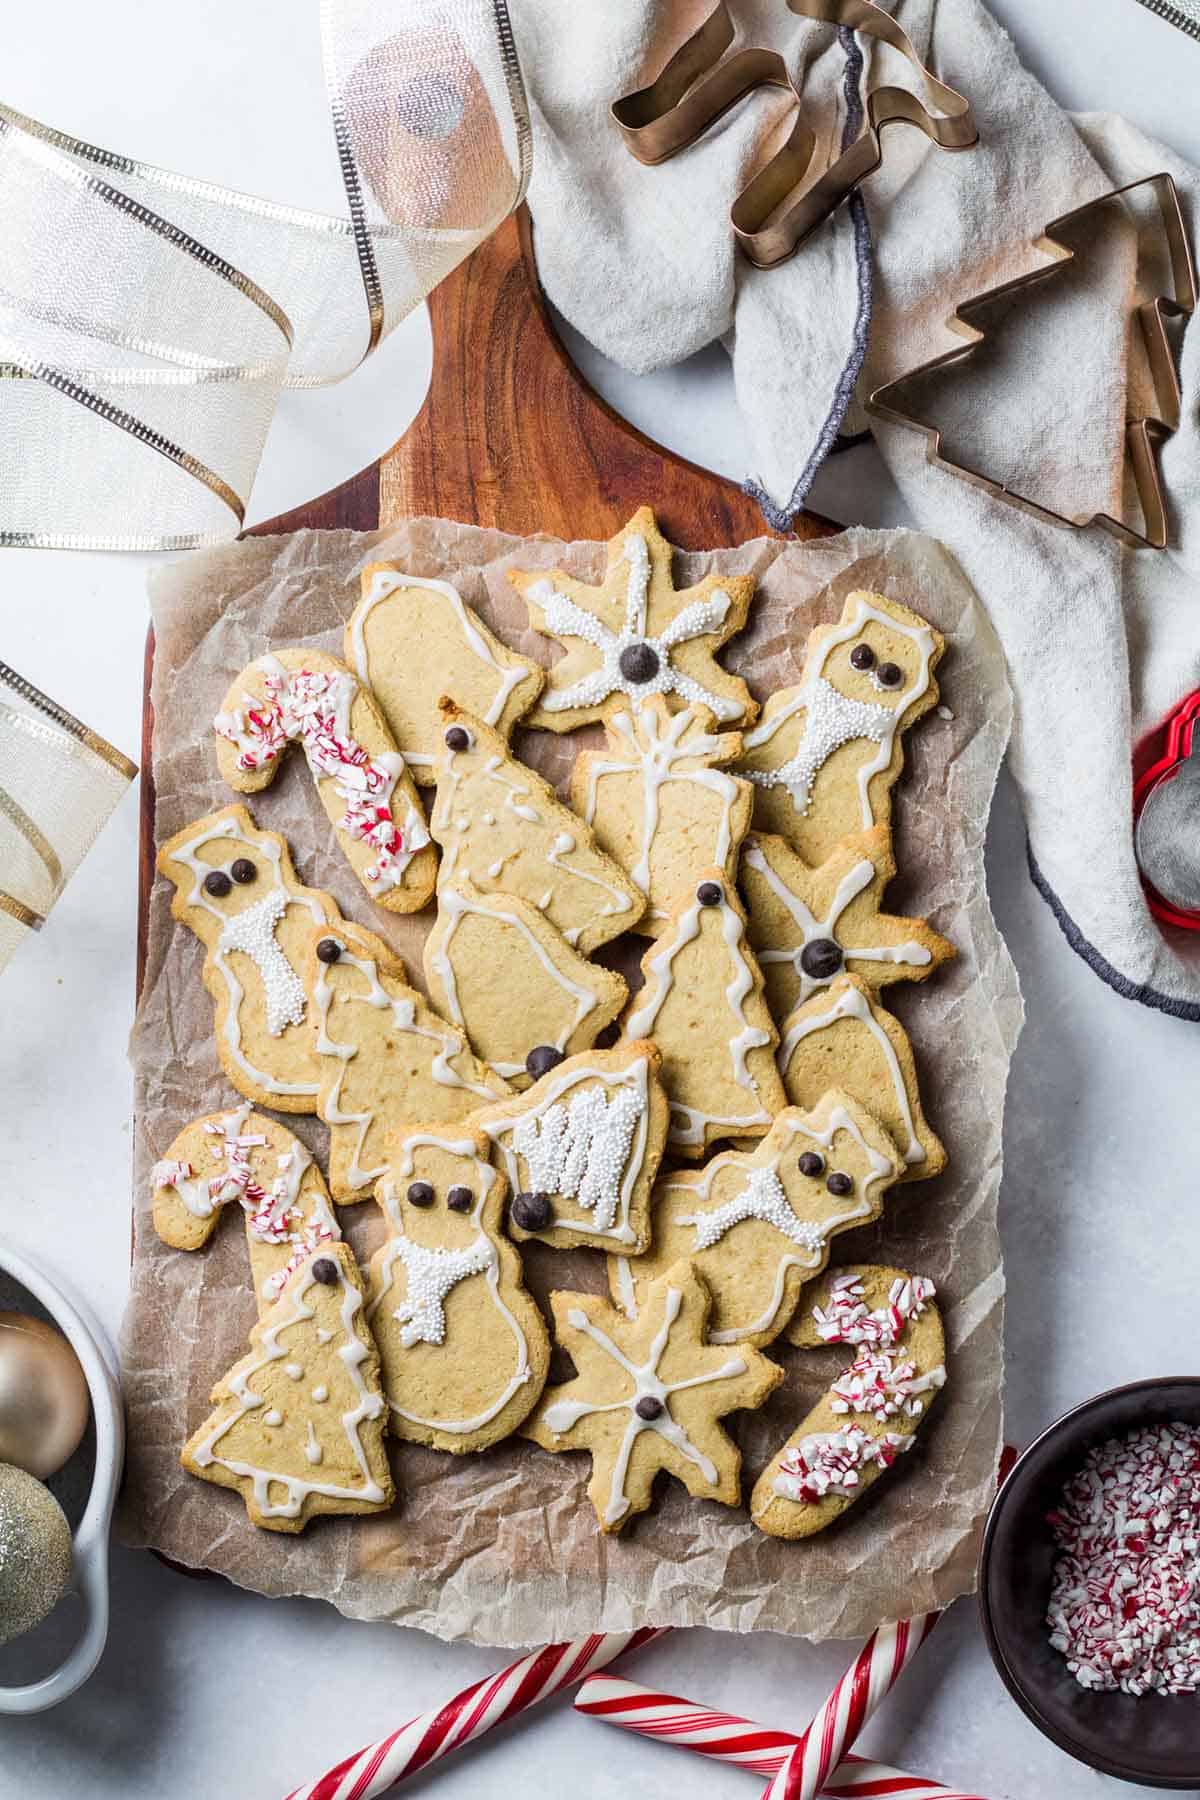 Birds eye view image of gluten free Christmas cookies on parchment paper surrounding by candy canes and Christmas ornaments. 